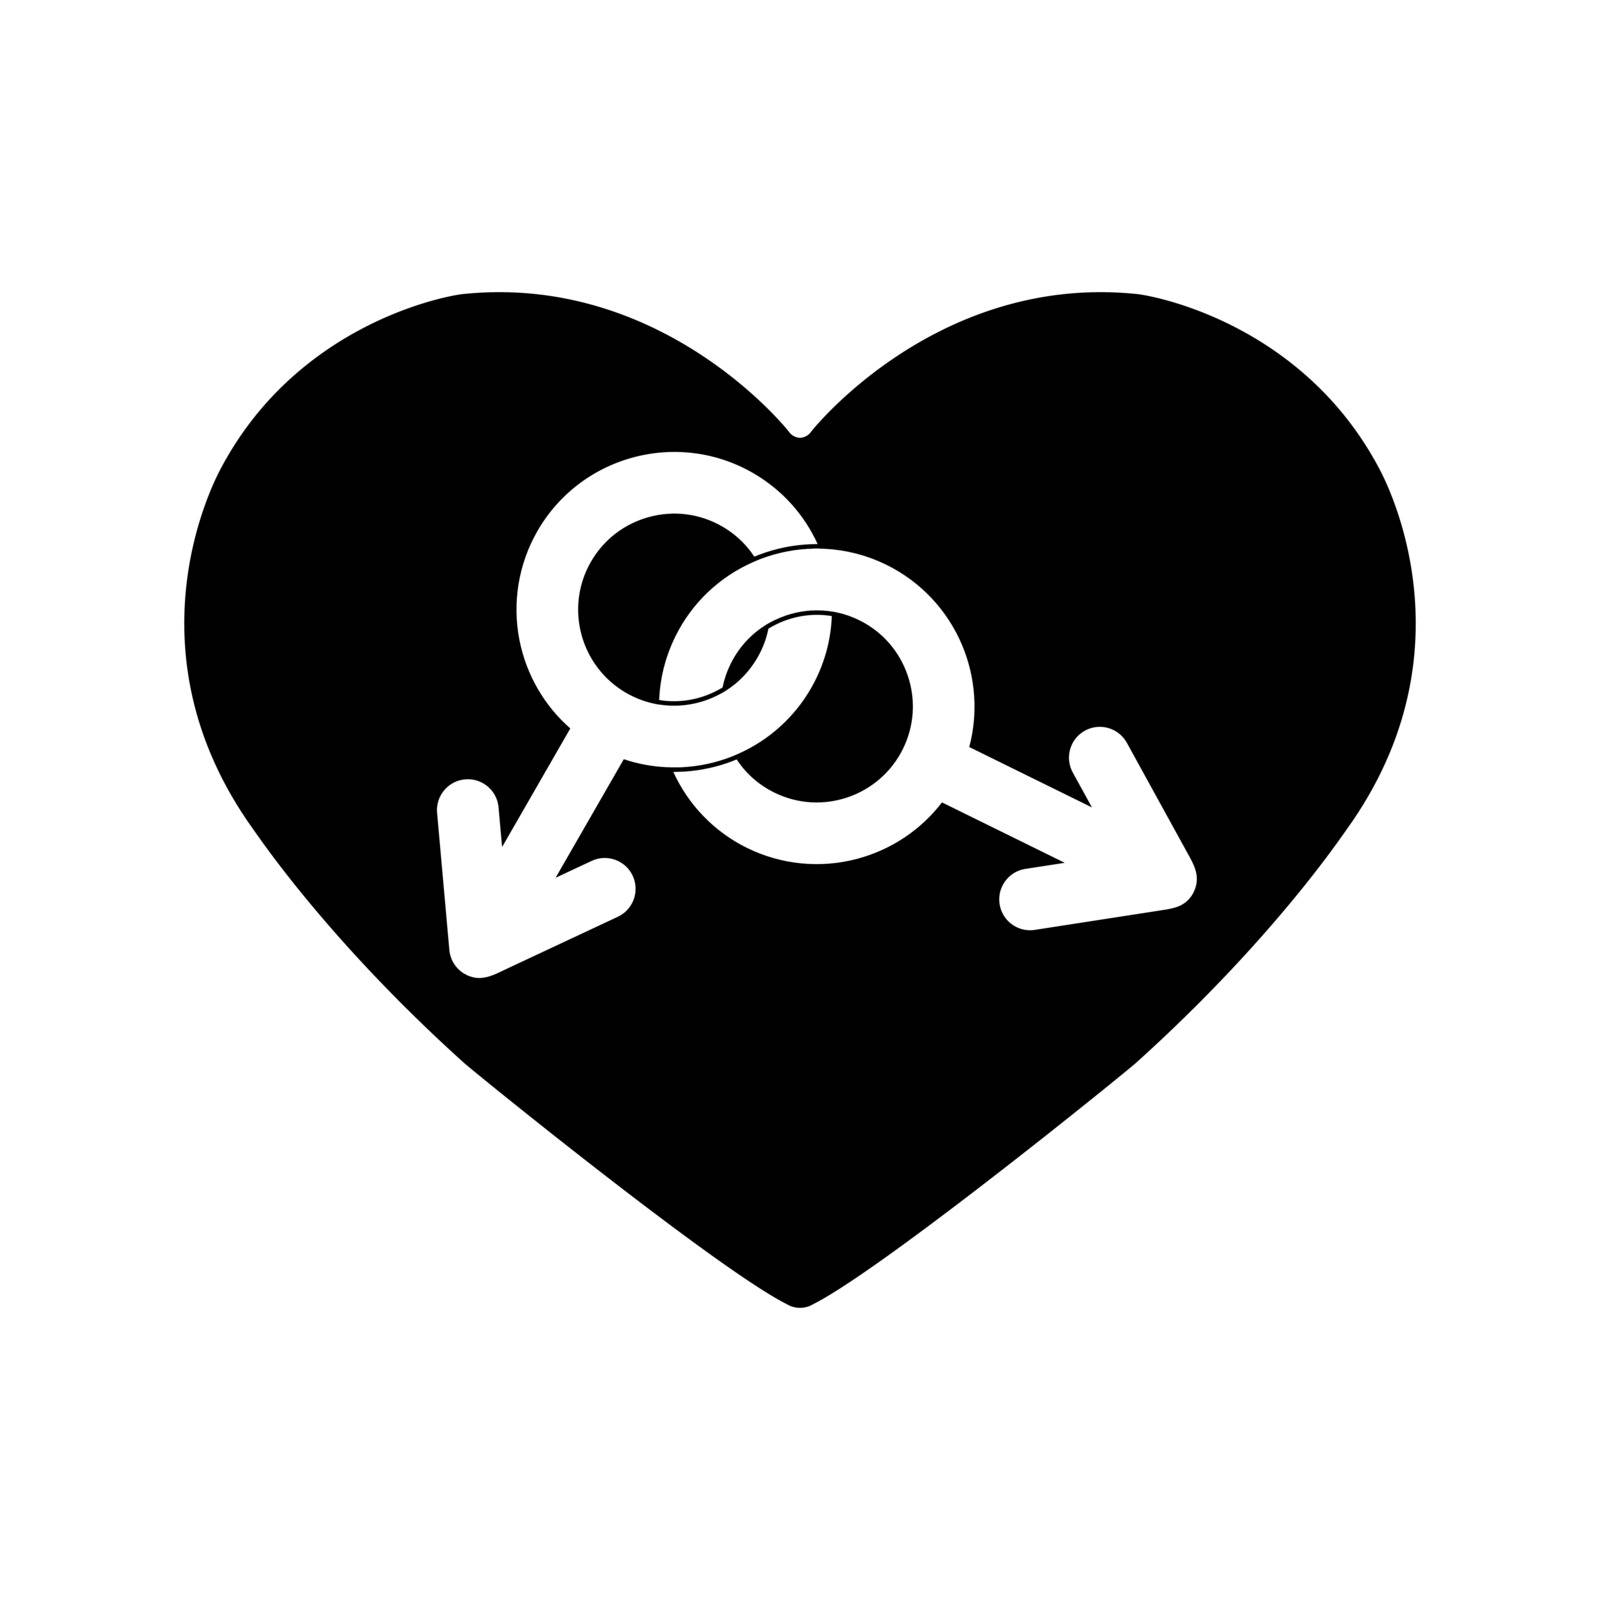 Gay symbol on the background of the heart. Two symbols of masculinity against the background of the heart, simple design